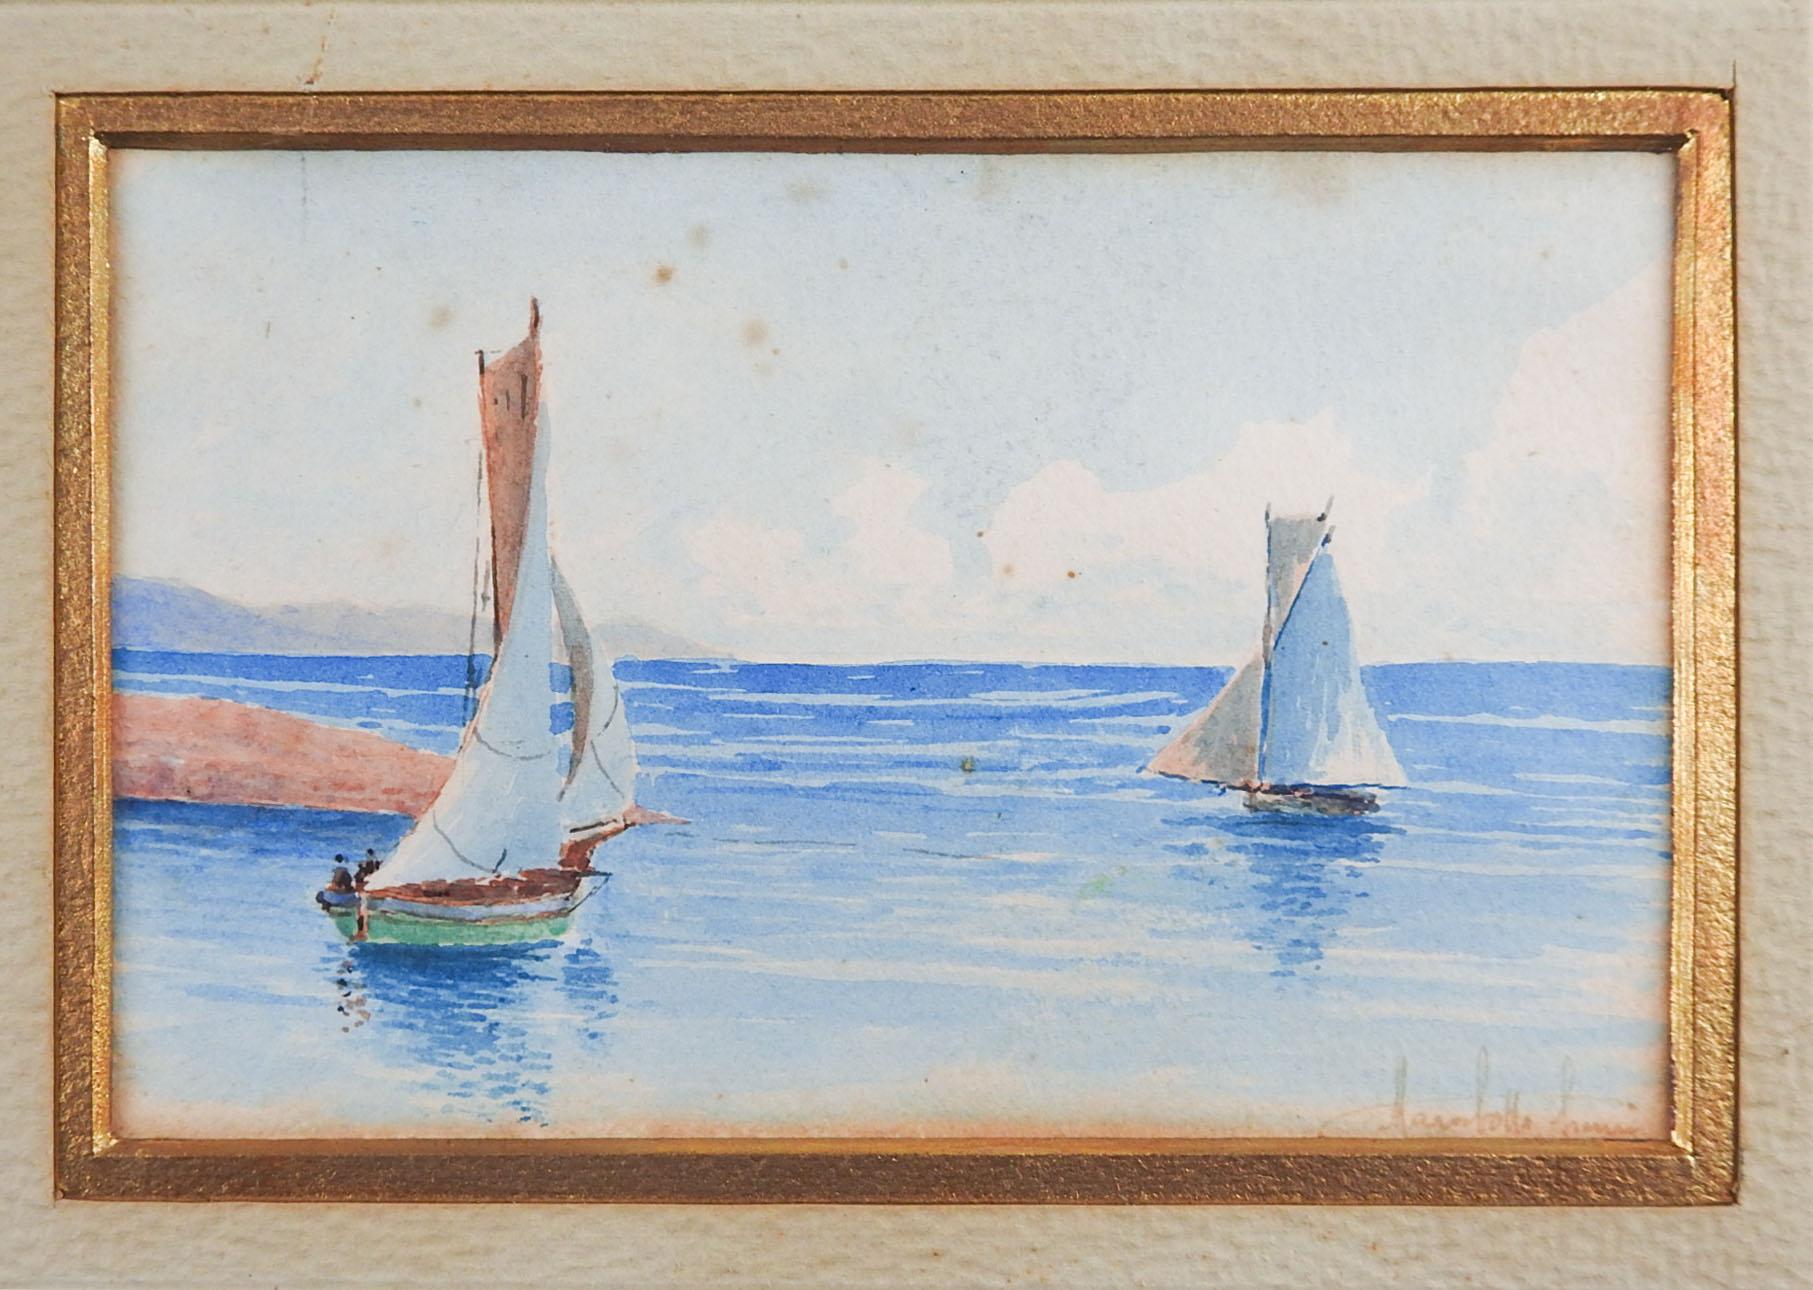 Circa 1910 watercolor on paper set of 3 sailboats.  Signed illegibly lower right corner.  Displayed together under original mat with period oak frame.  Each painting is 5.25